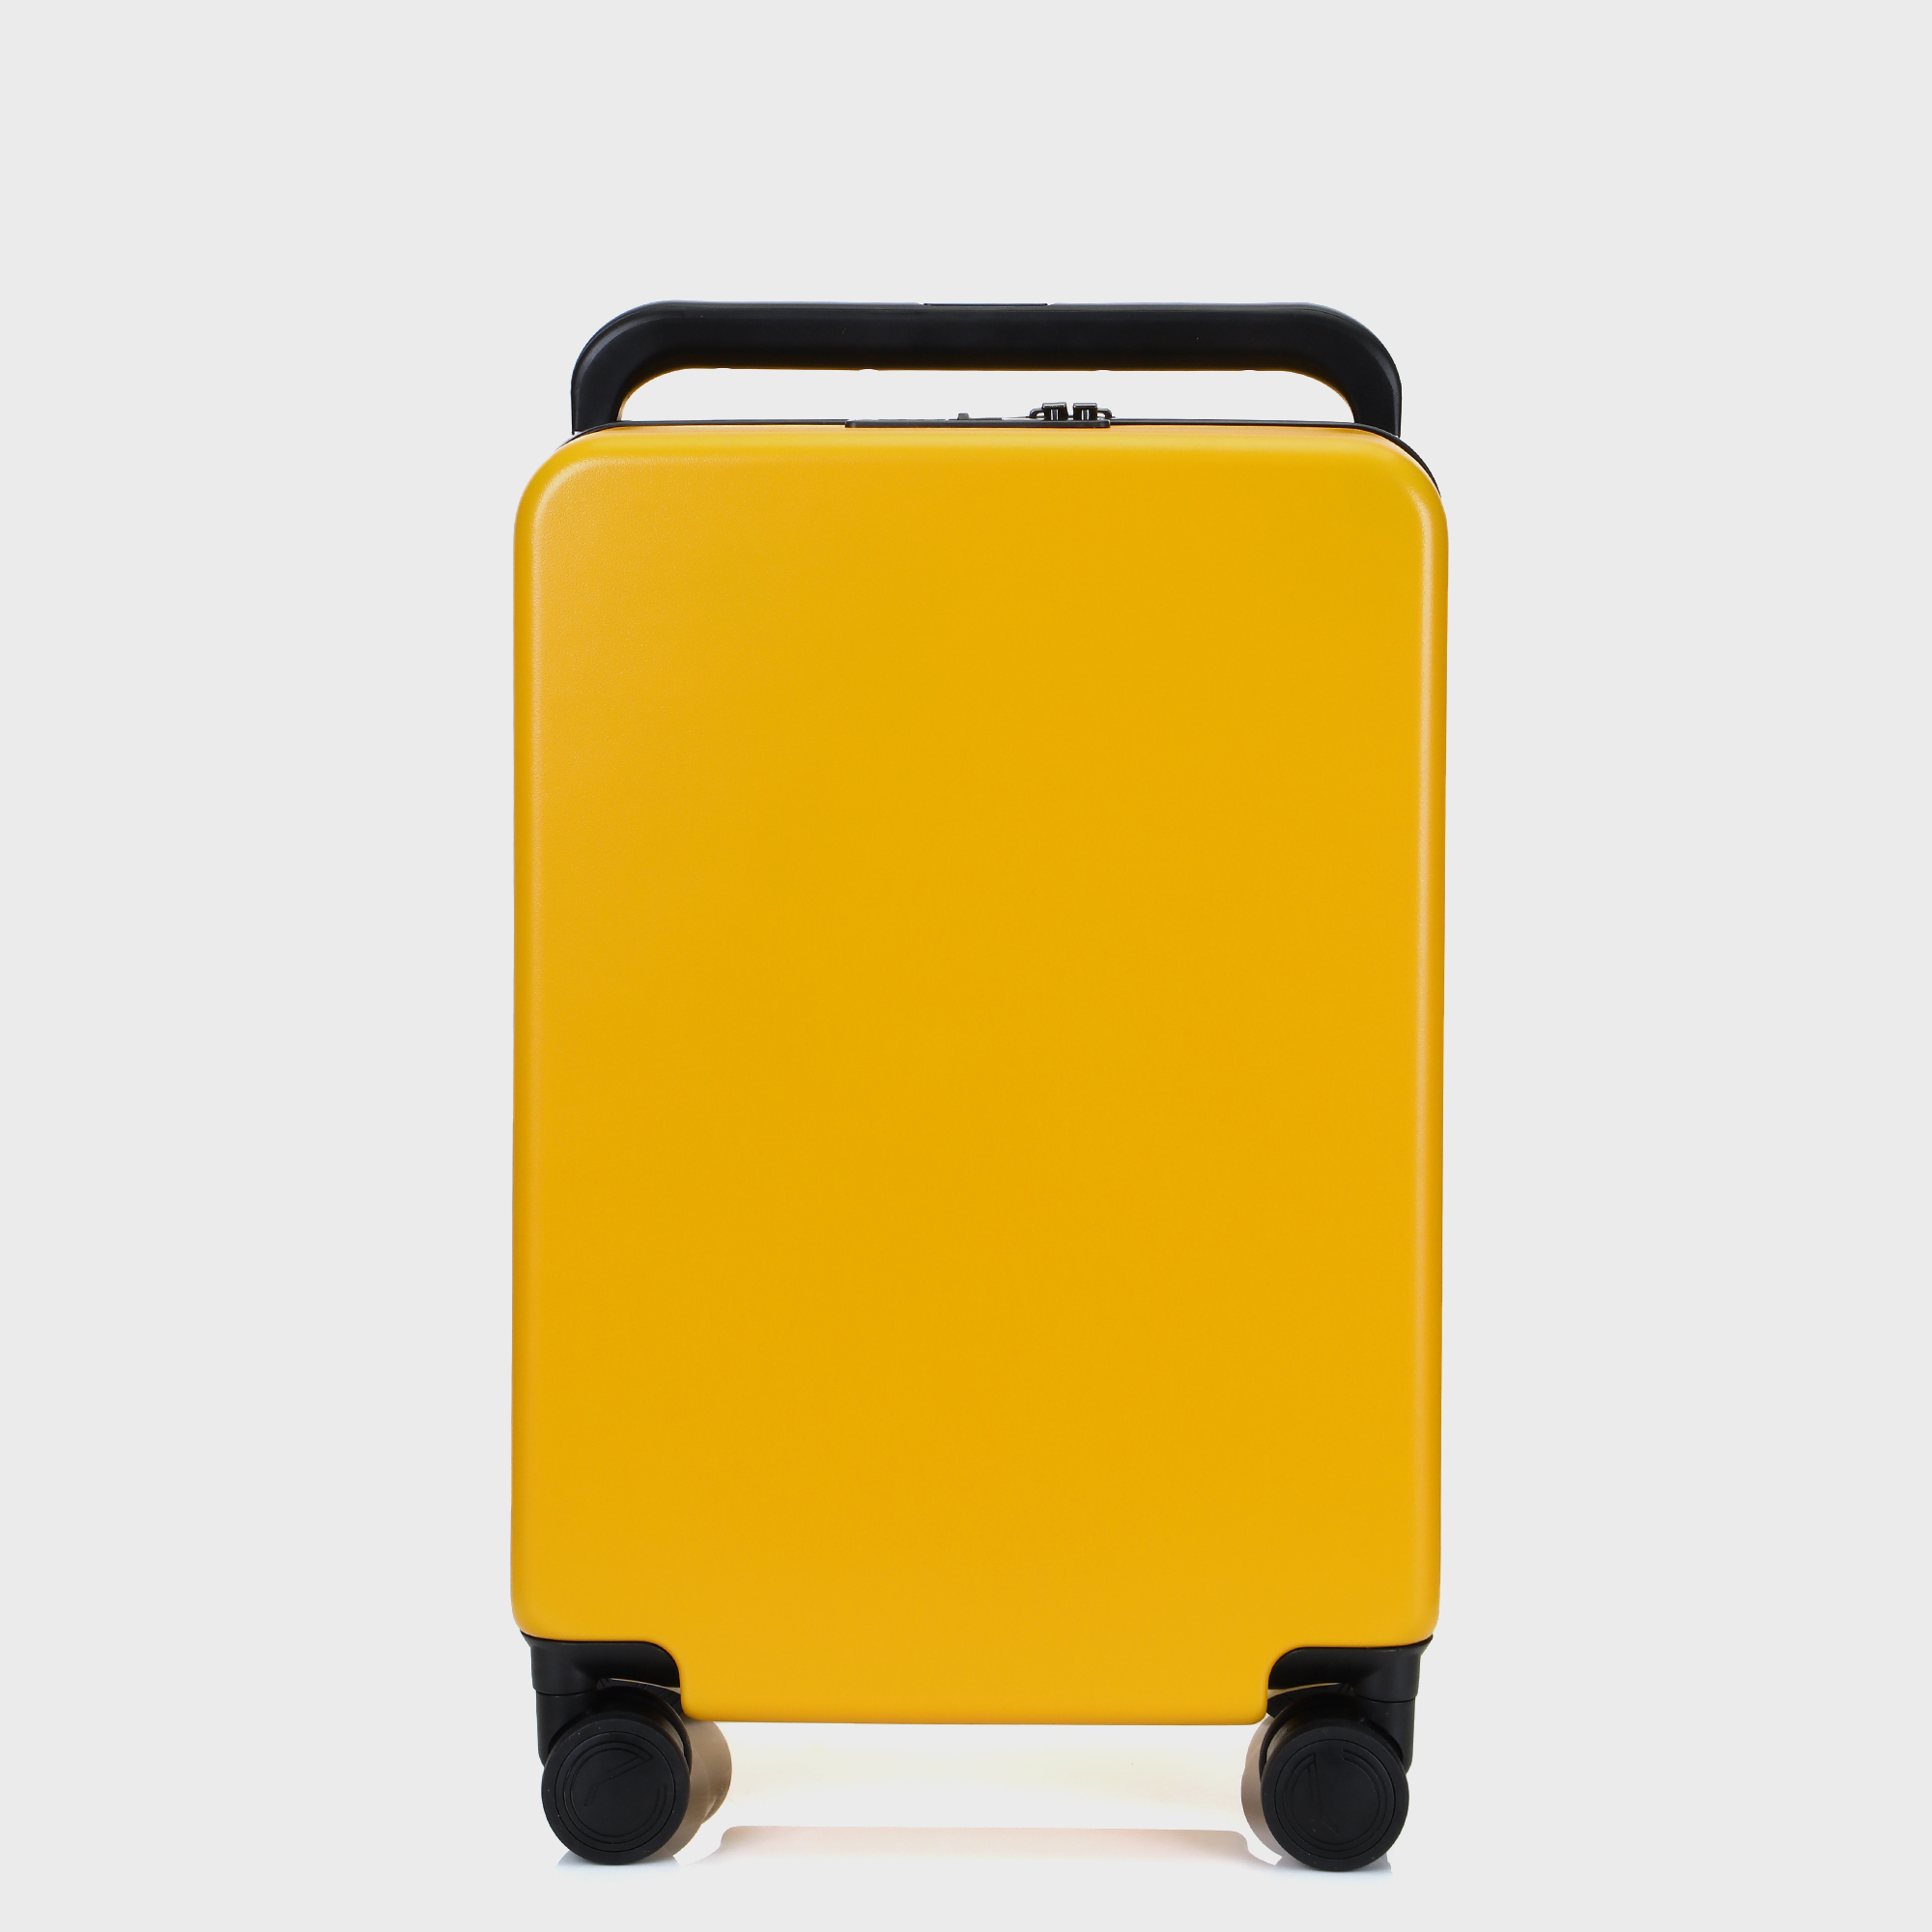 Ogram Popping PC Hard Travel Suitcase 20 Inch 24 Inch 28 Inch Carrier Yellow